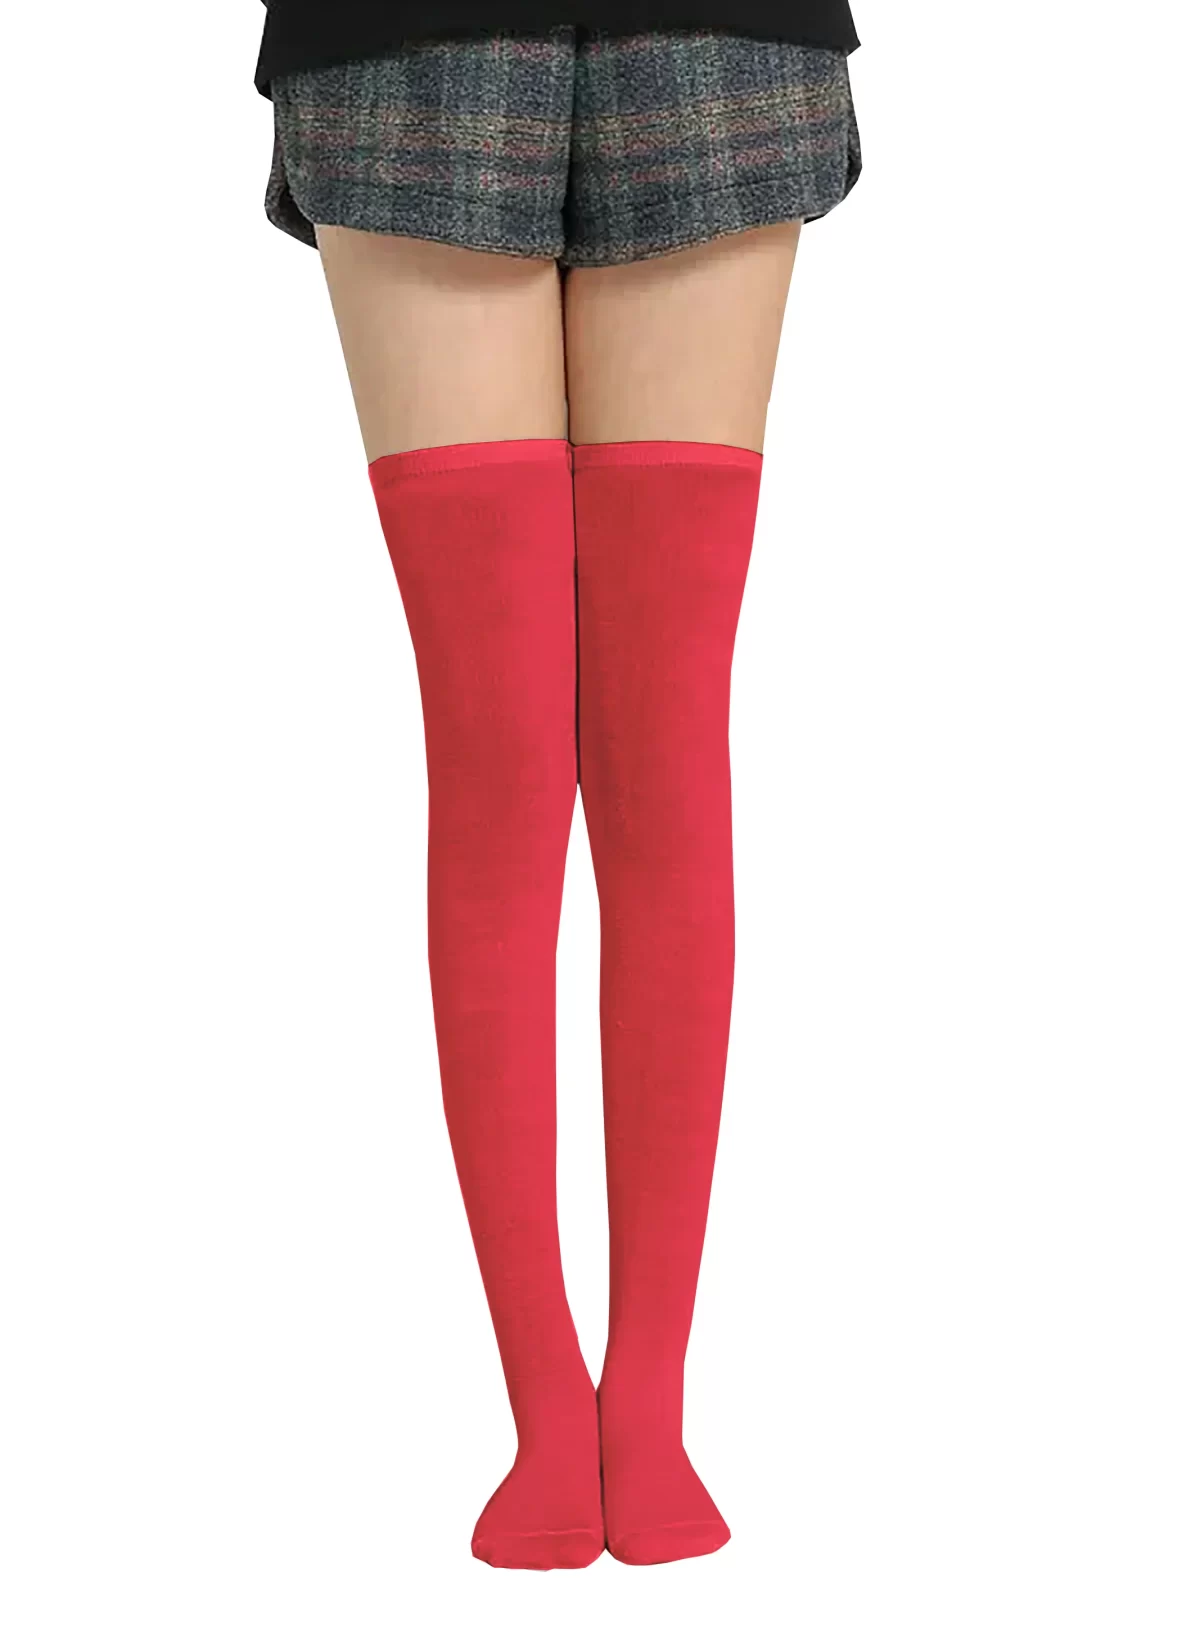 Red Girls and Women's Thigh High Stocking/Socks ( Free Size )1